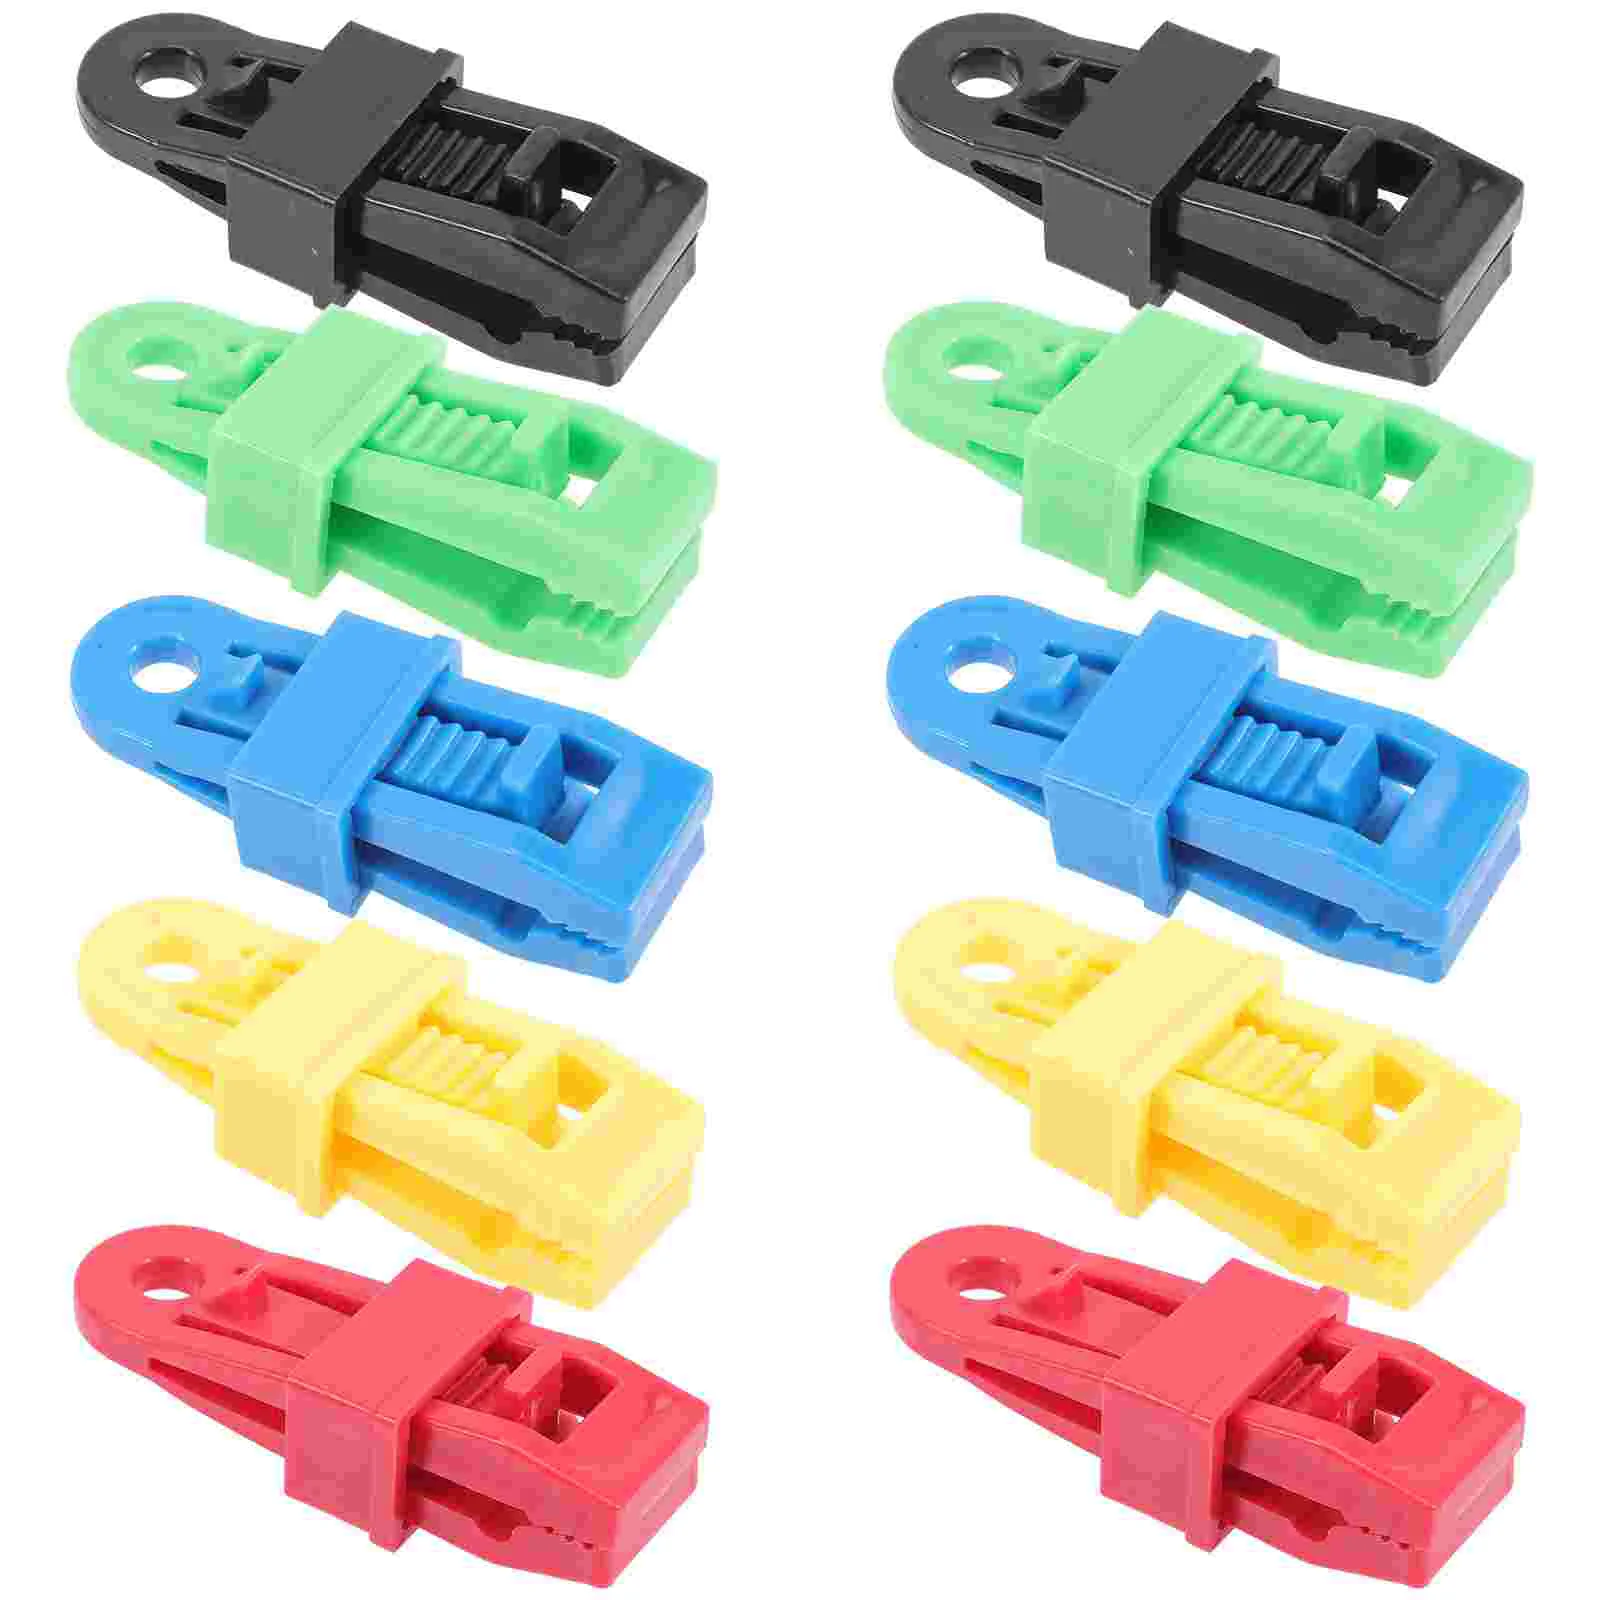 

10 Pcs Tent Clip Canopy Clamps Camping Practical Fasteners Hiking Clips Outdoor Awning Canopy Heavy Duty Windproof